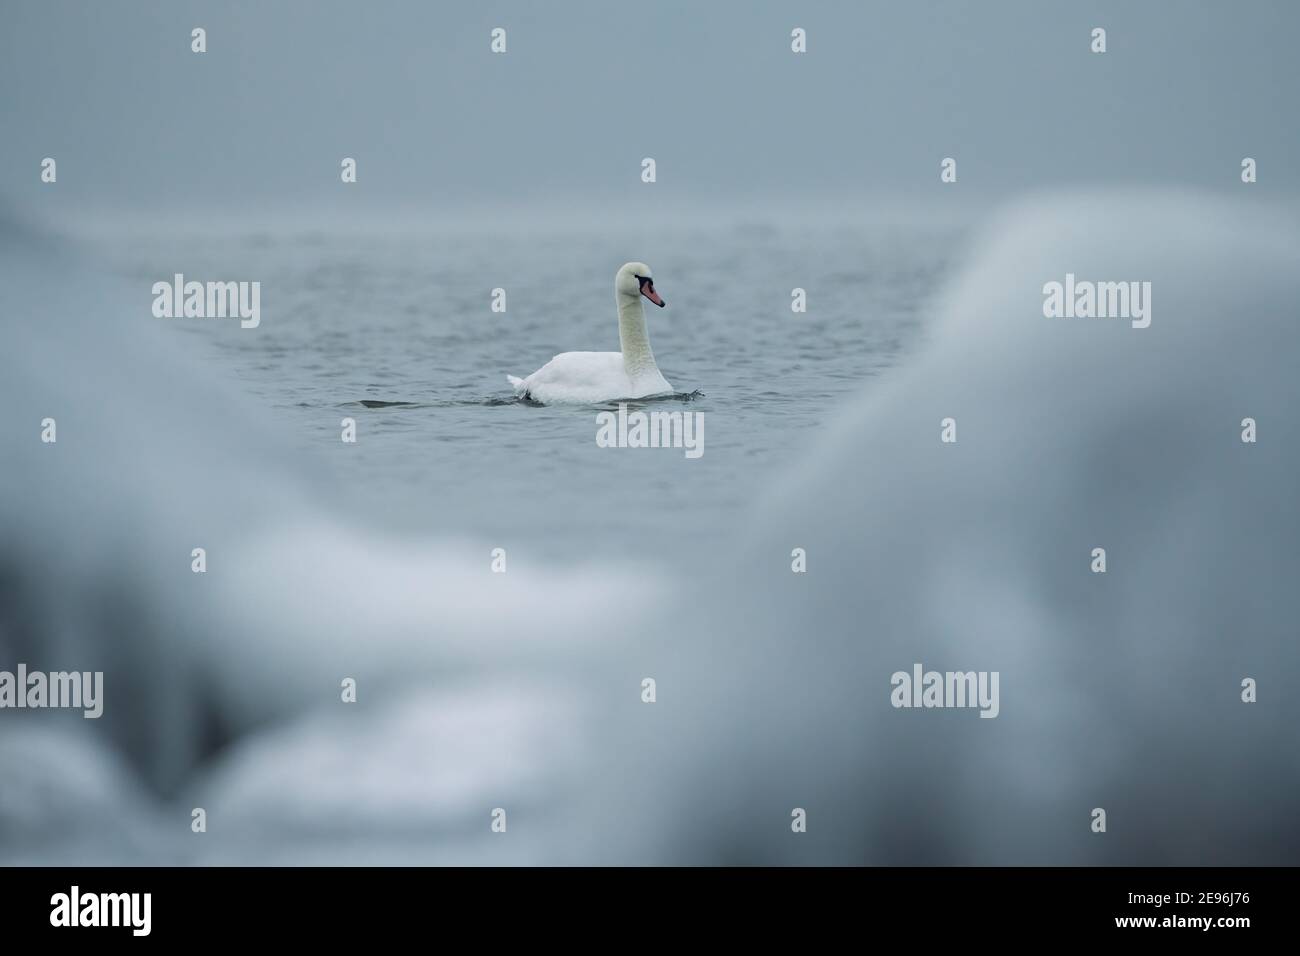 Lonely swan swimming in the ice cold water of the Baltic Sea in Helsinki, Finland few hours before freeze-up over in January 2021. Stock Photo